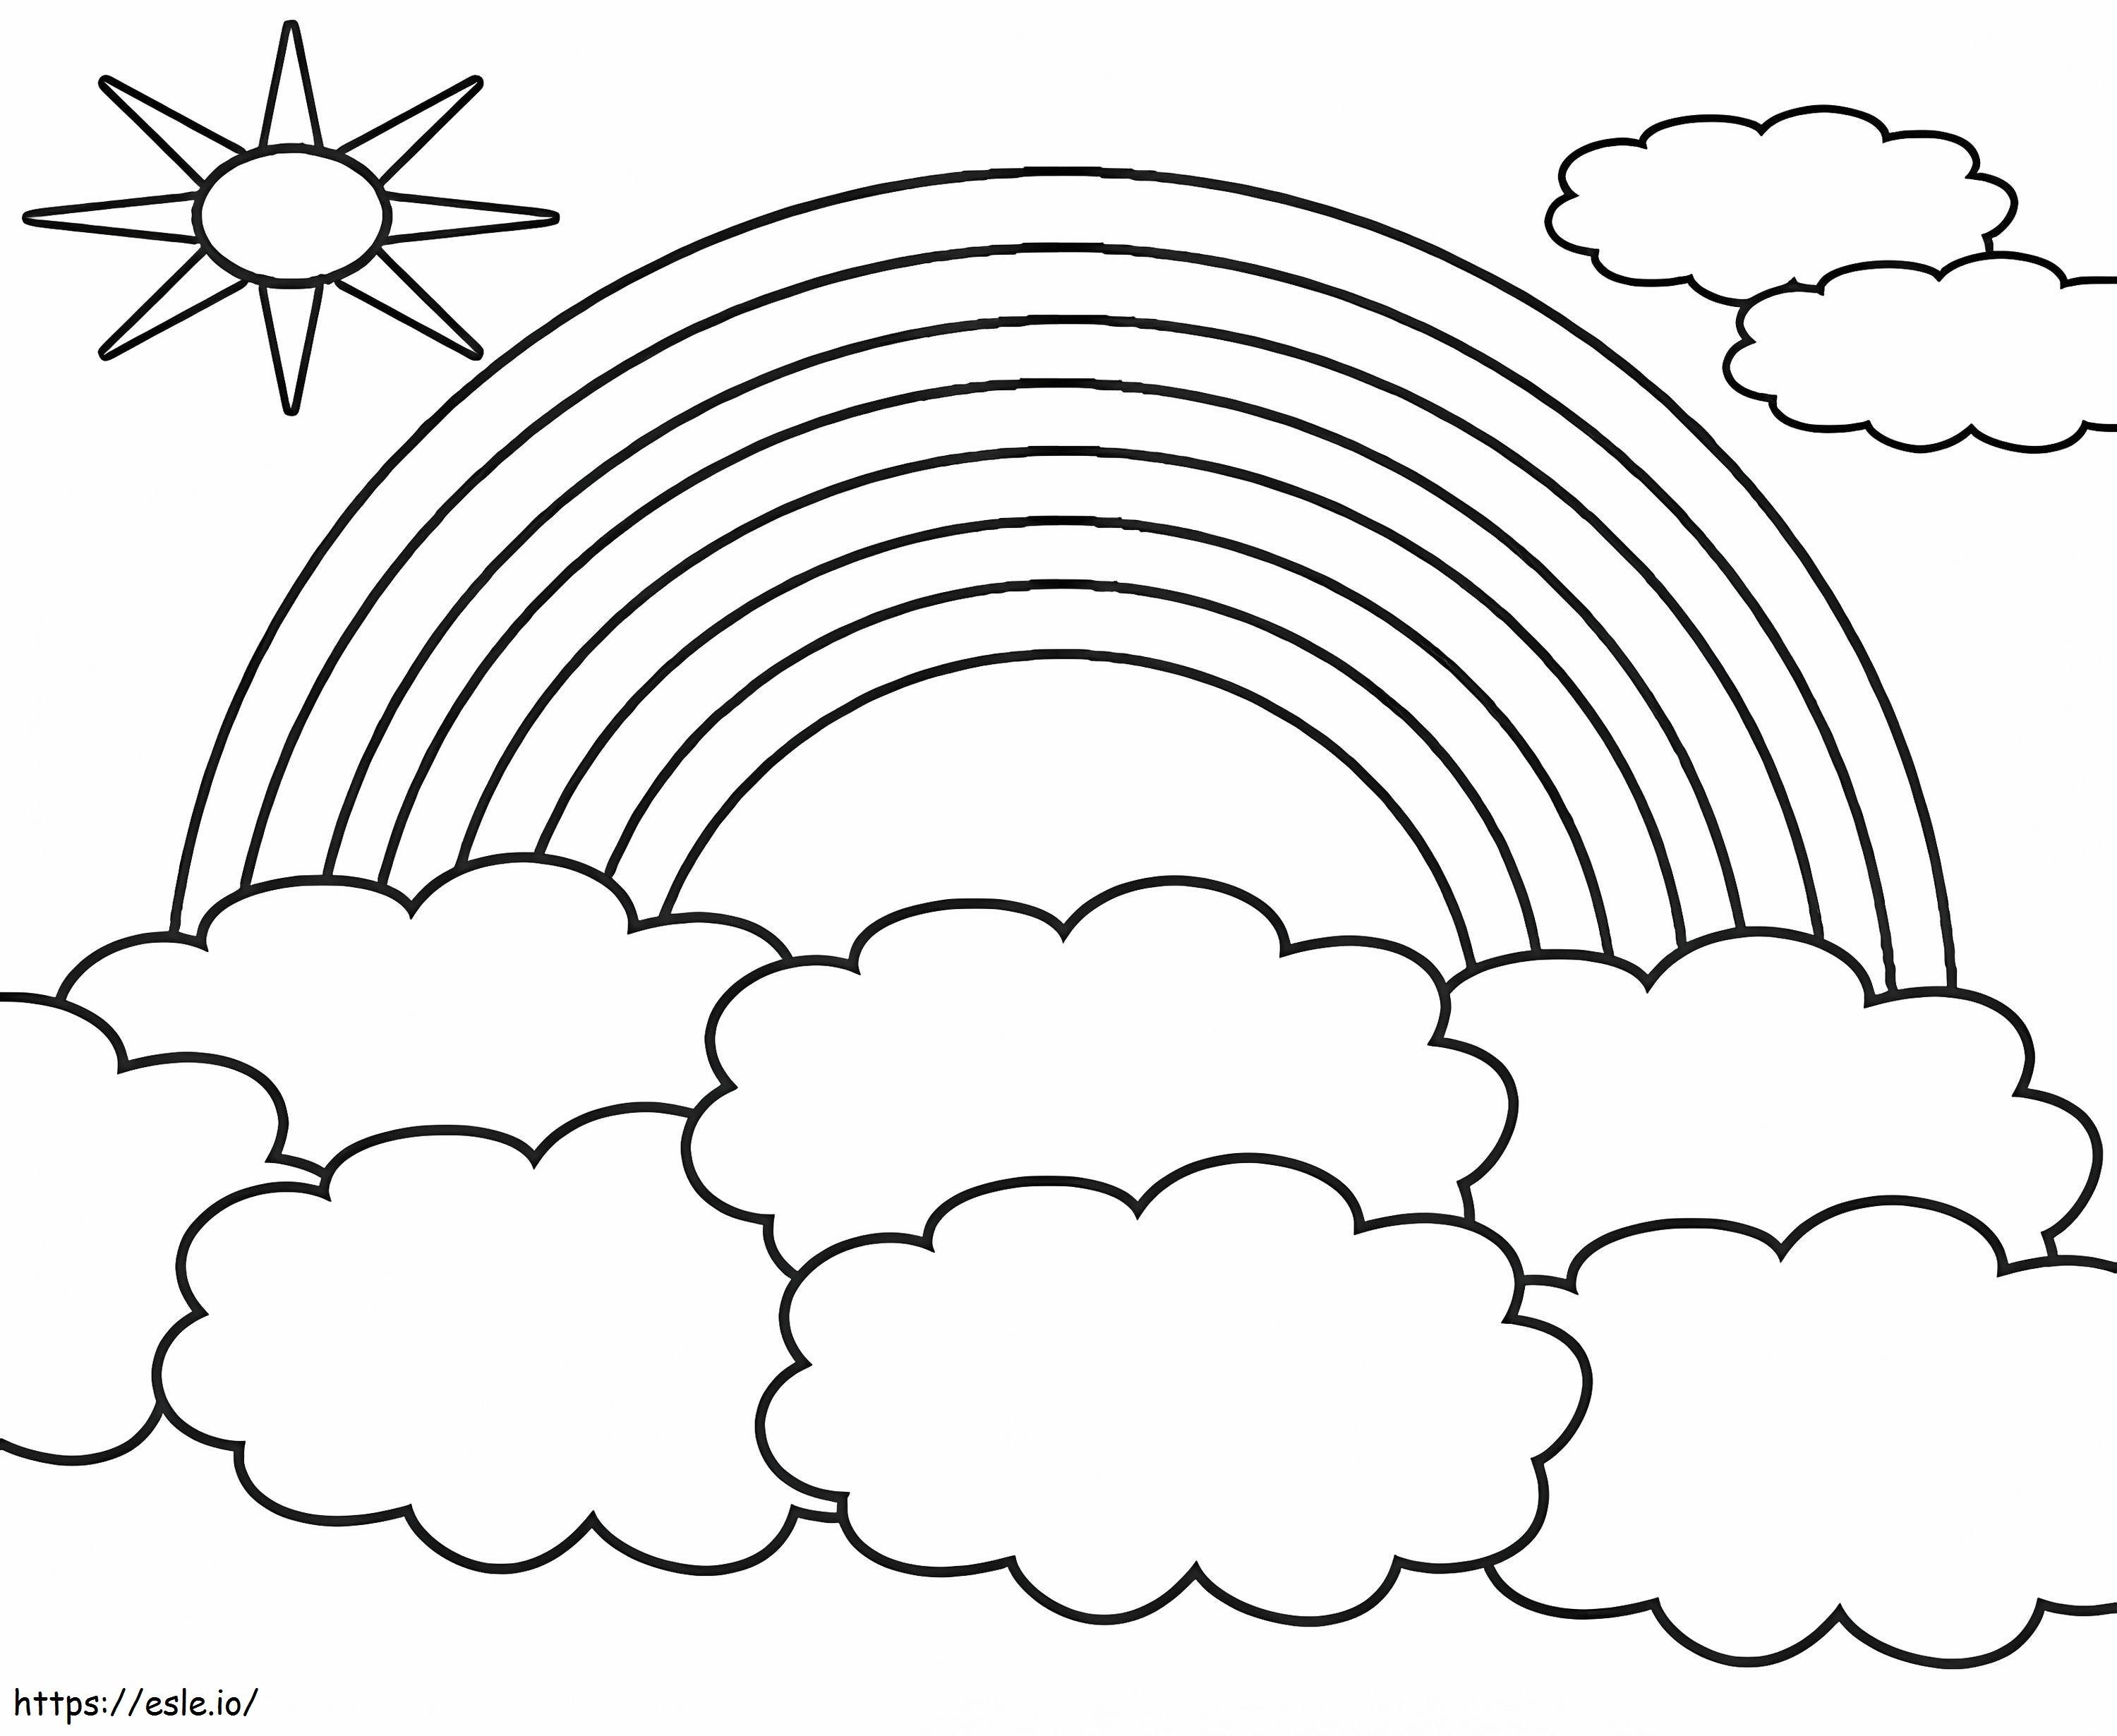 Rainbow With Sun And Clouds coloring page